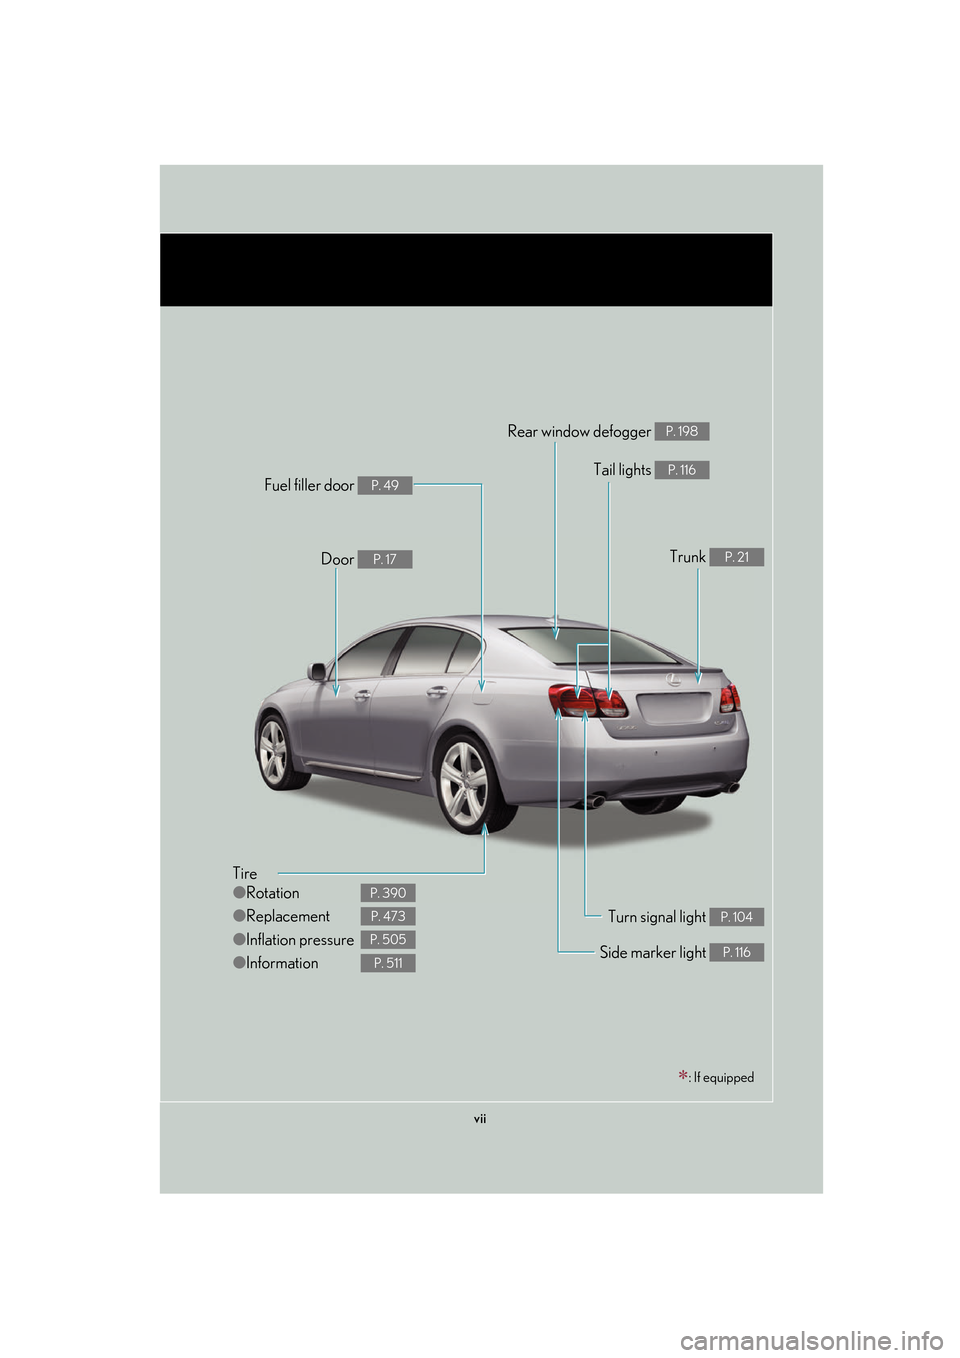 Lexus GS350 2007  Driving Comfort / LEXUS 2007 GS430/350 OWNERS MANUAL (OM30A04U) vii
Tire
●Rotation
● Replacement
● Inflation pressure
● Information
P. 390
P. 473
P. 505
P. 511
Tail lights P. 116
Side marker light P. 116
Trunk P. 21
Rear window defogger P. 198
Door P. 17
F